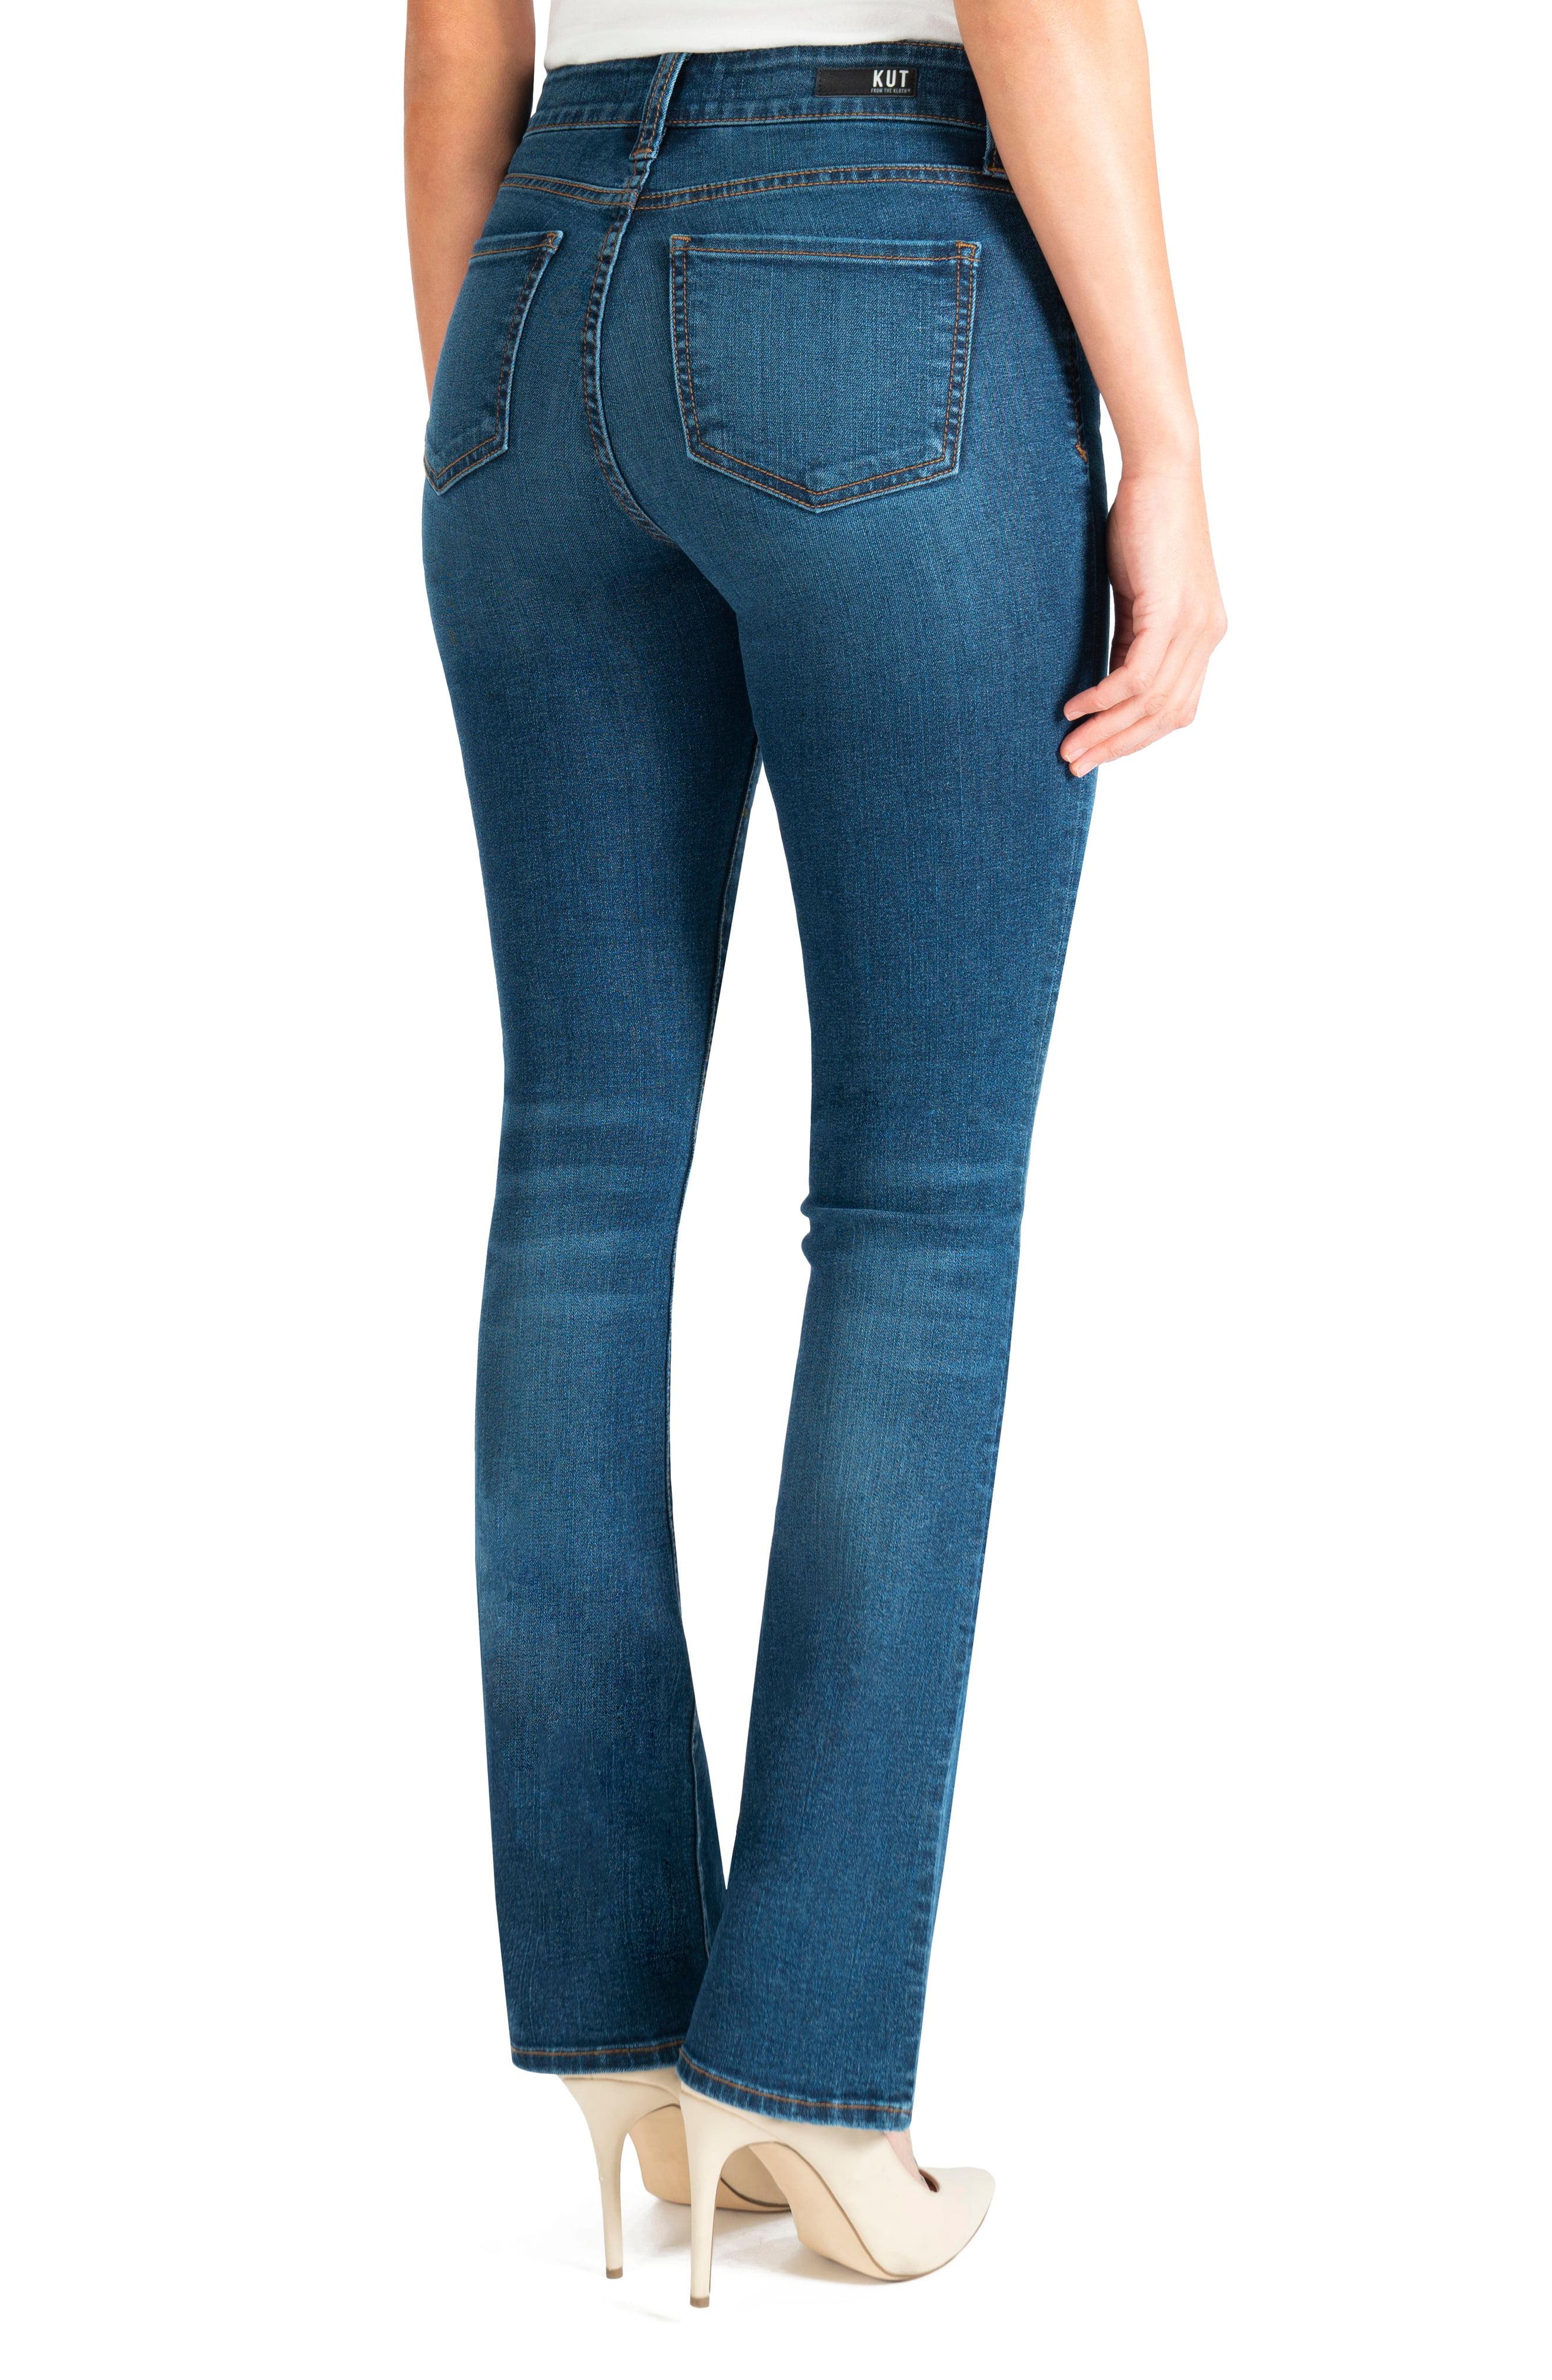 Kut From The Kloth Natalie High Waist Bootcut Jeans in Blue | Lyst